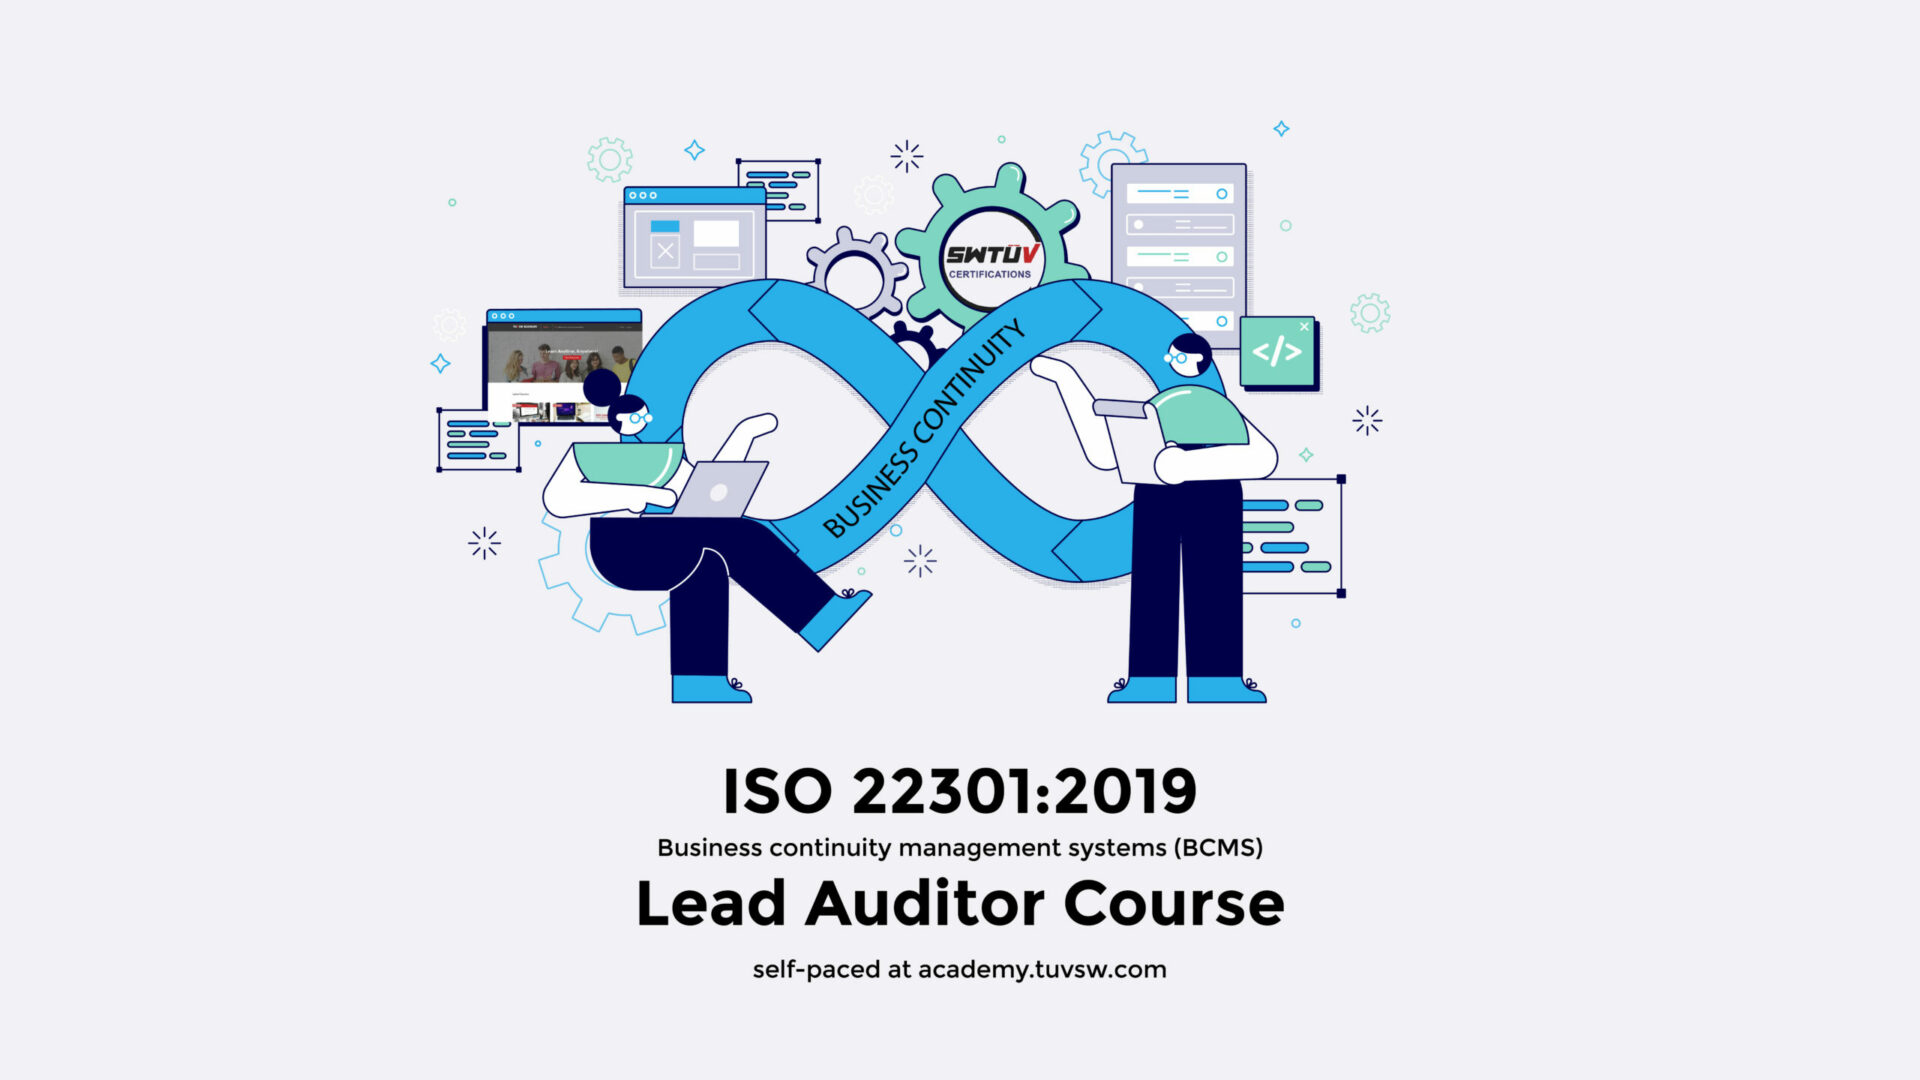 ISO 22301:2019 (BCMS) Lead Auditor Training Course